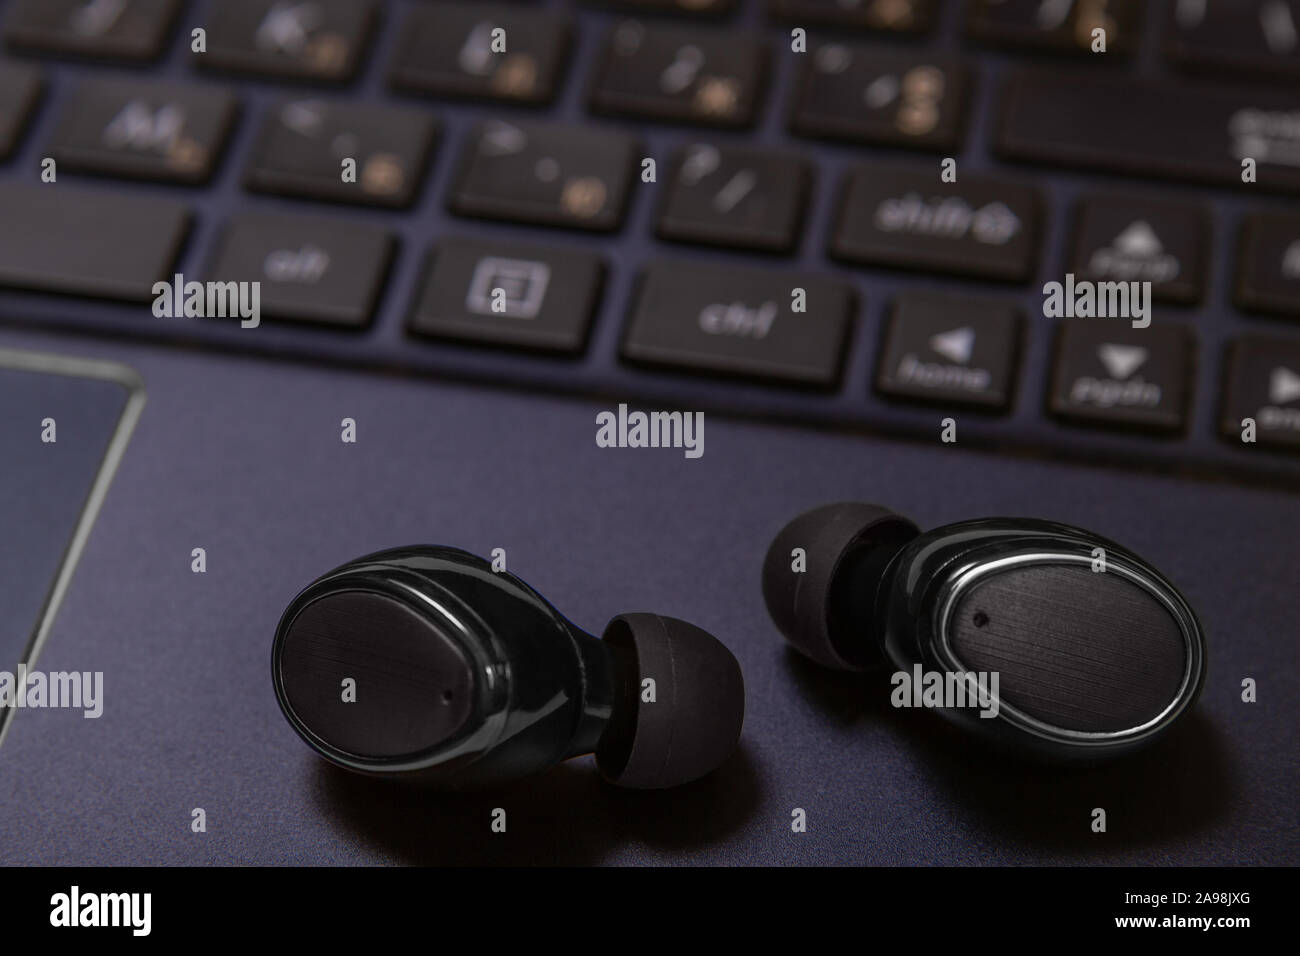 Close-up of wireless earpieces lying on a laptop keyboard Stock Photo